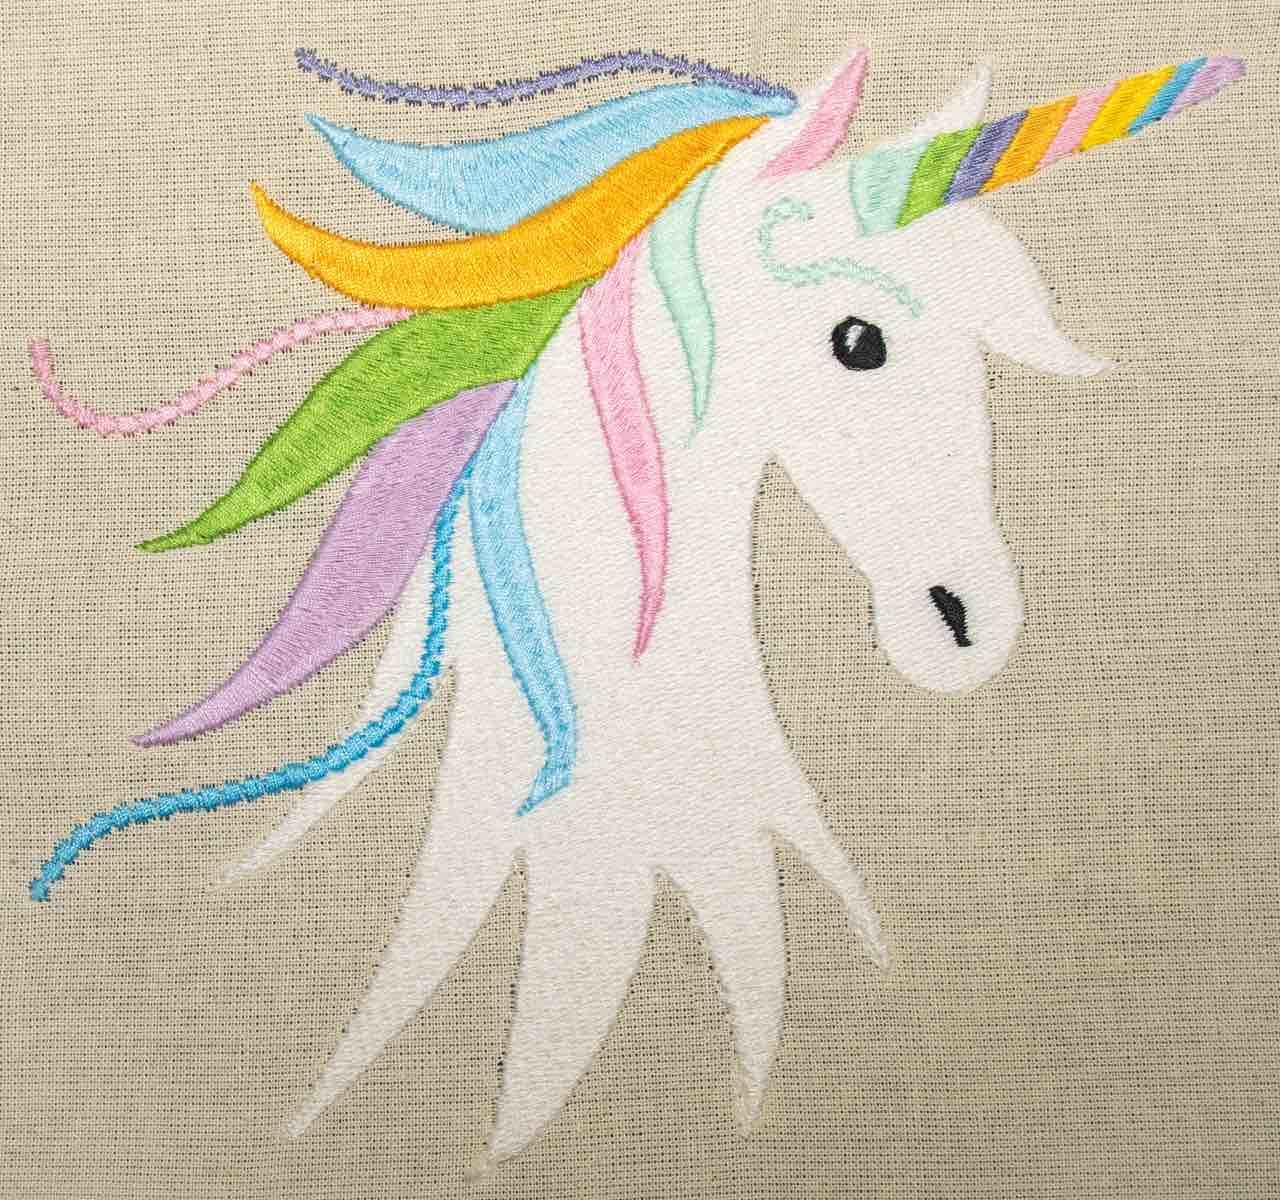 Horse Embroidery Patterns Unicorns And Horses At Doodle Threads Machine Embroidery Designs